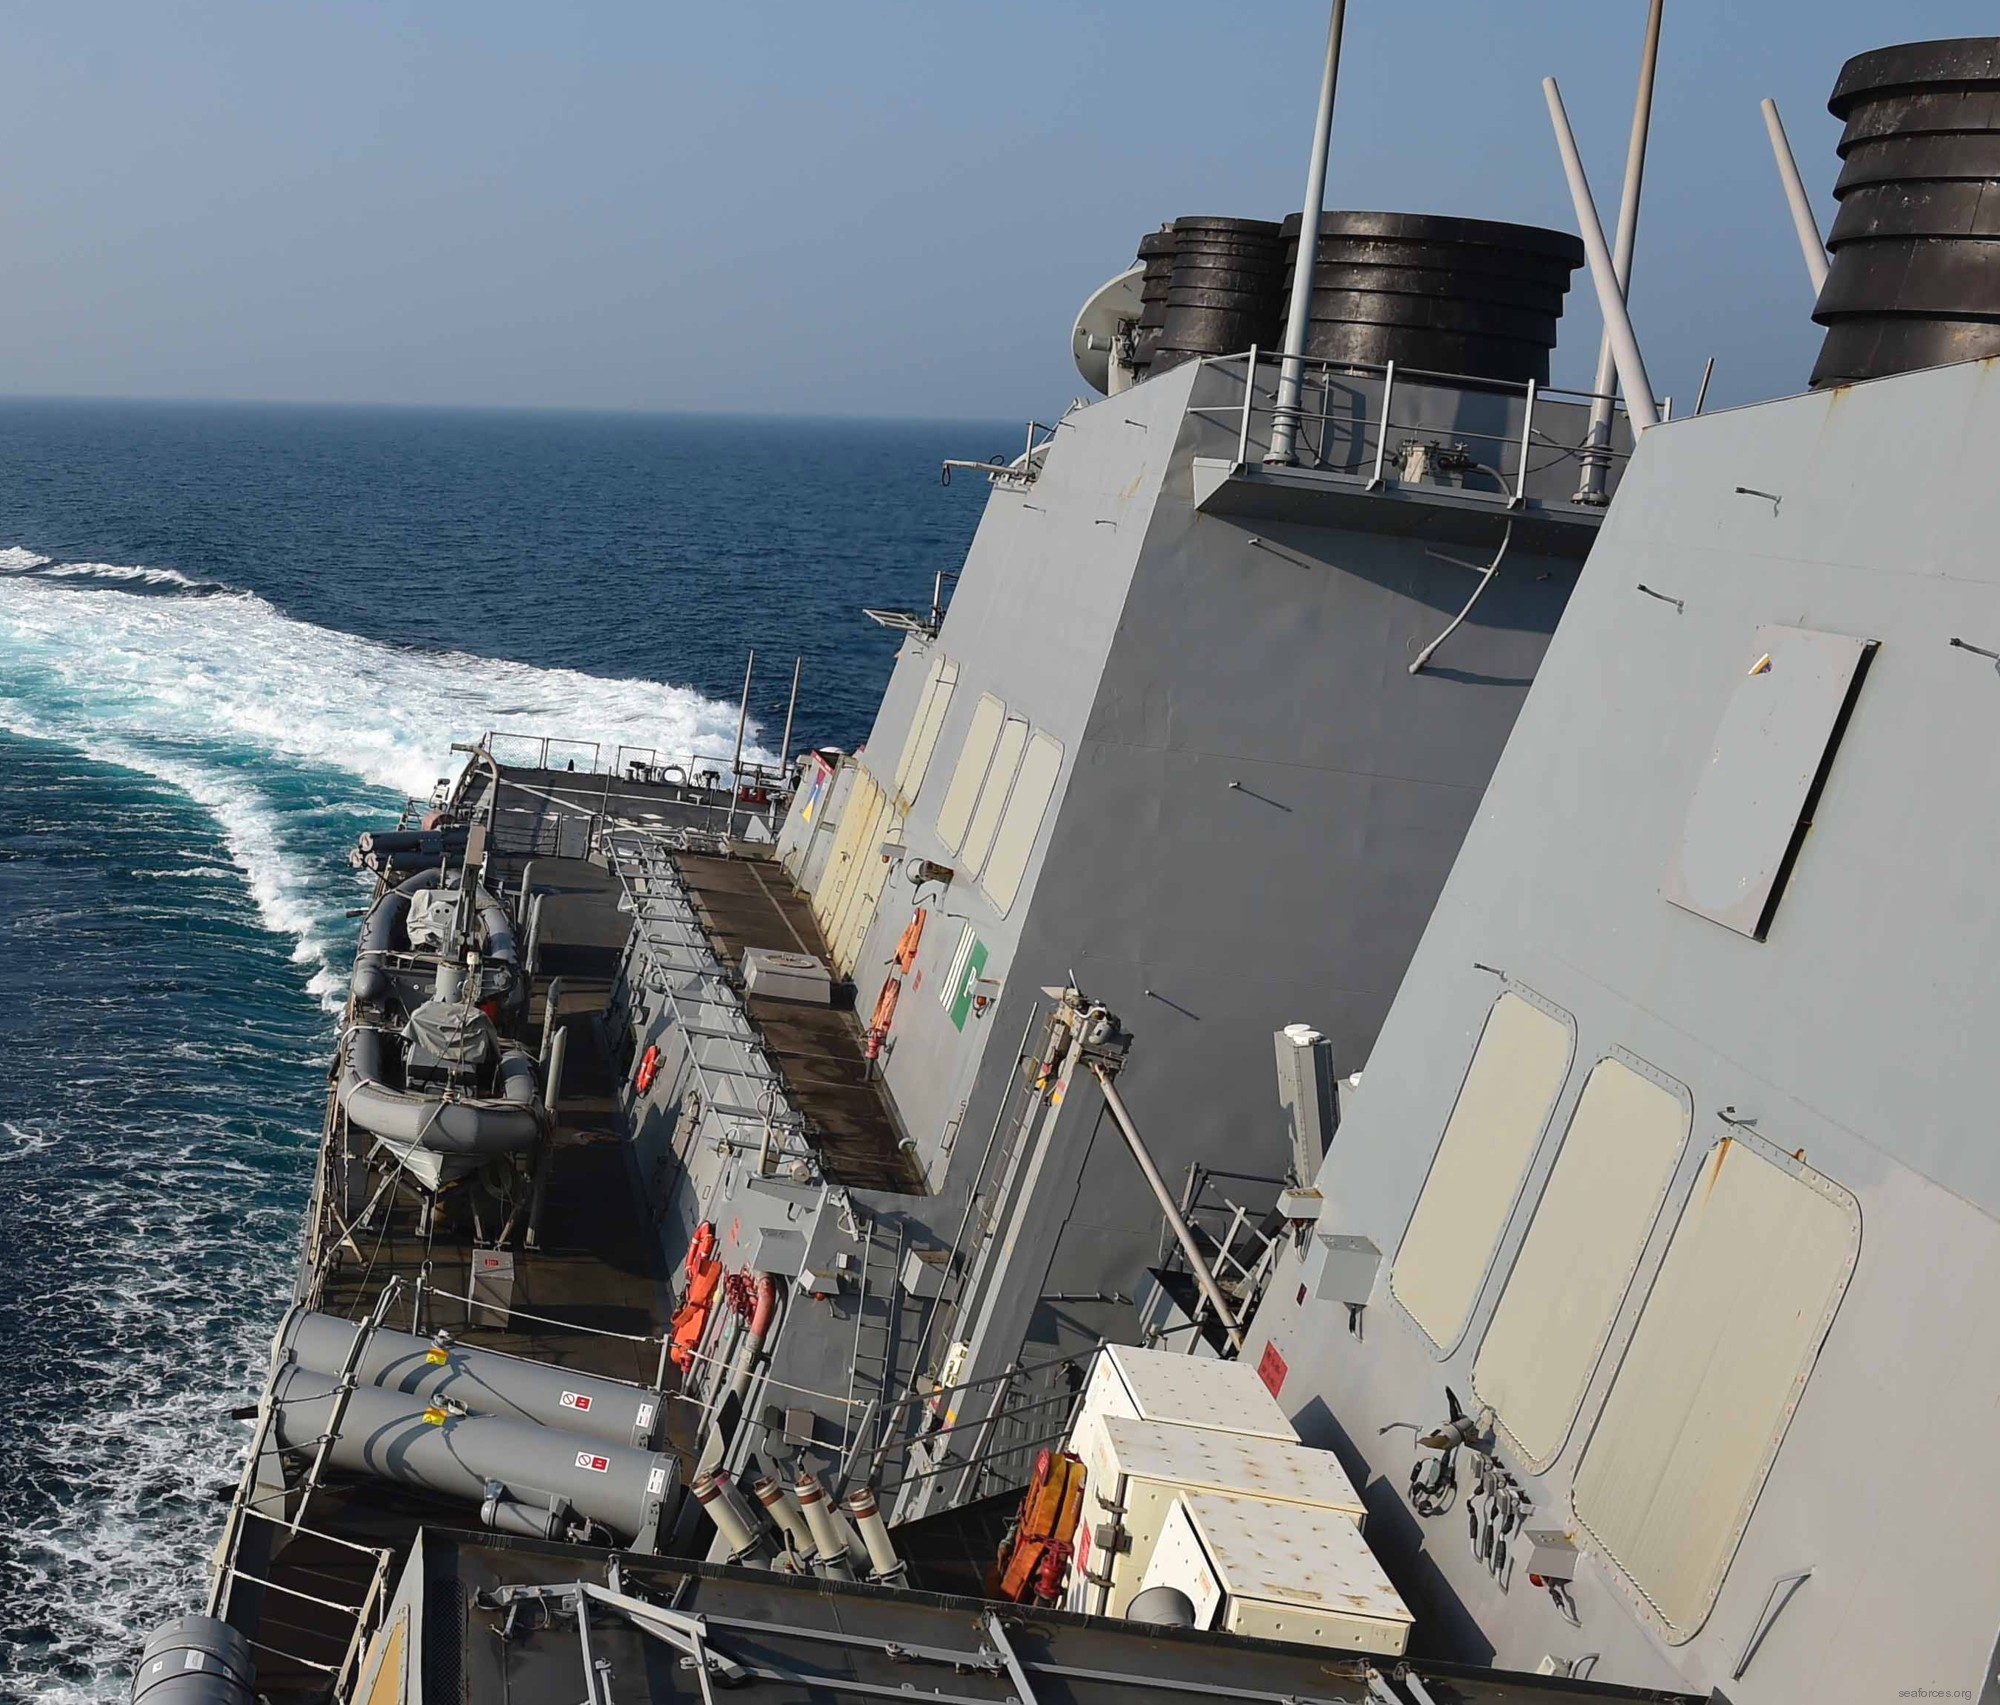 ddg-71 uss ross guided missile destroyer arleigh burke class aegis bmd 42